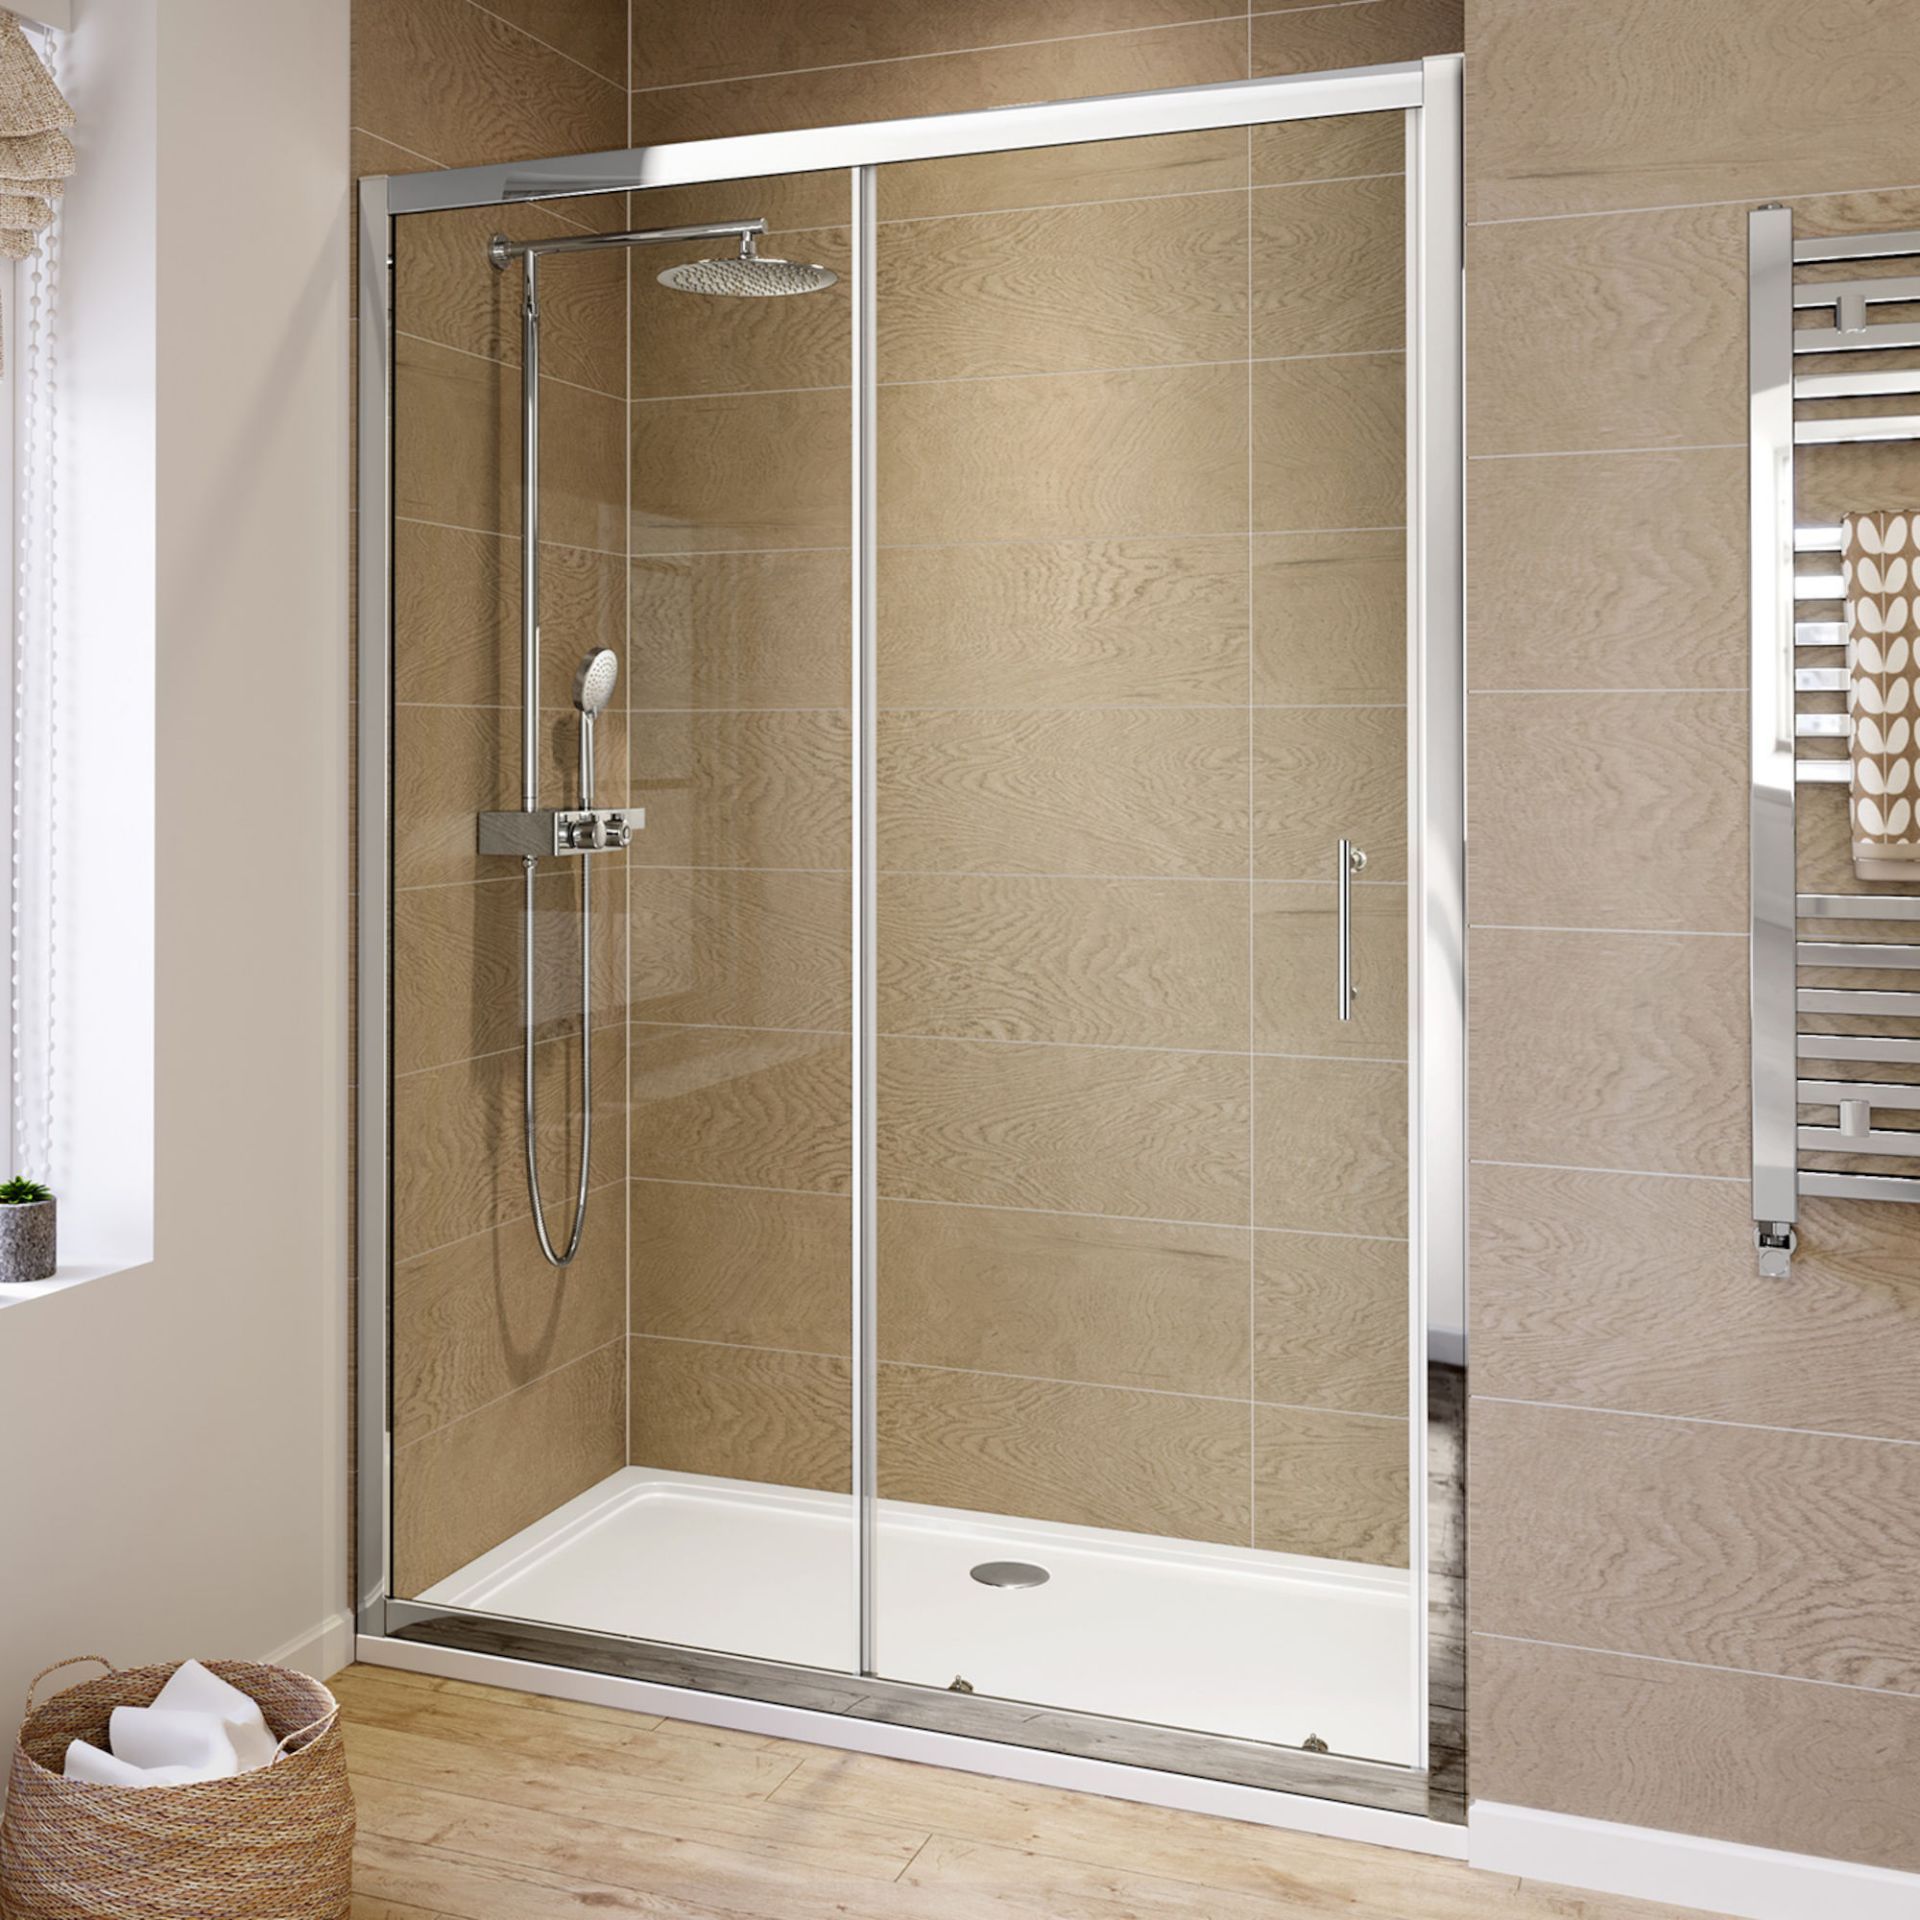 NEW & BOXED 1700mm - 6mm - Elements Sliding Shower Door. RRP £299.99.6mm Safety Glass Fully wa...